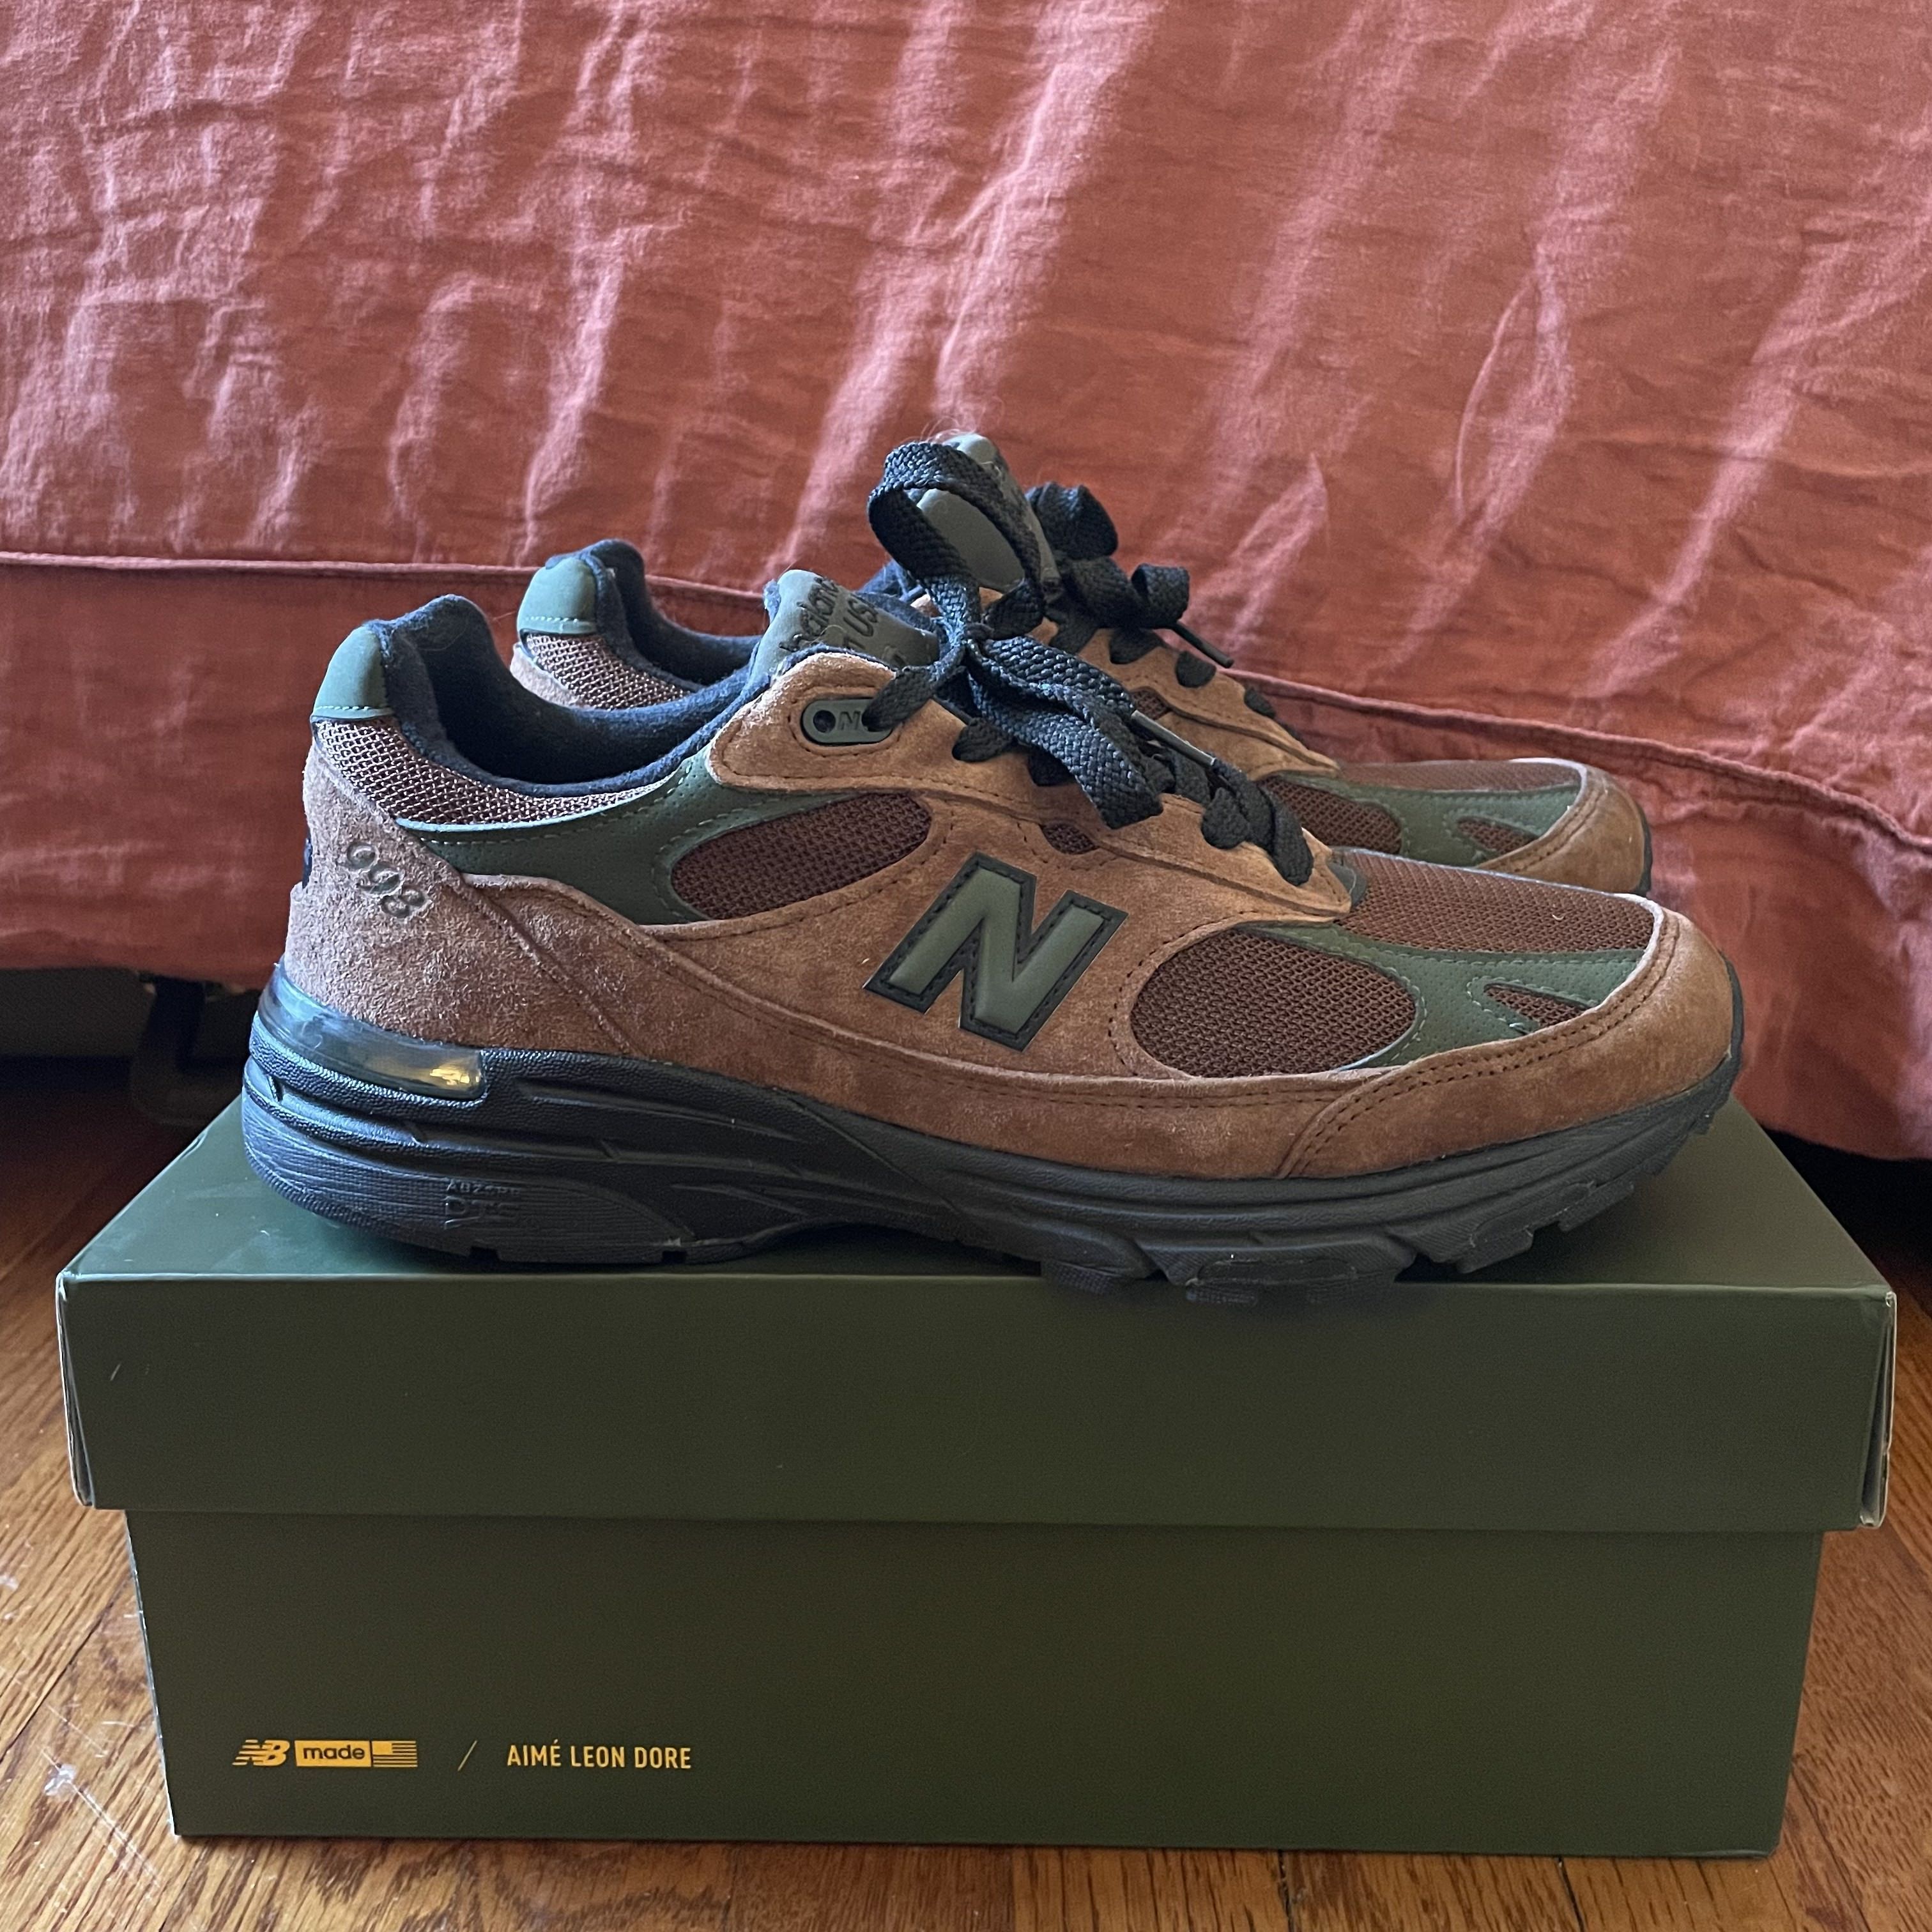 Pre-owned Aime Leon Dore X New Balance Aime Leon Dore New Balance 993 Shoes In Green/brown